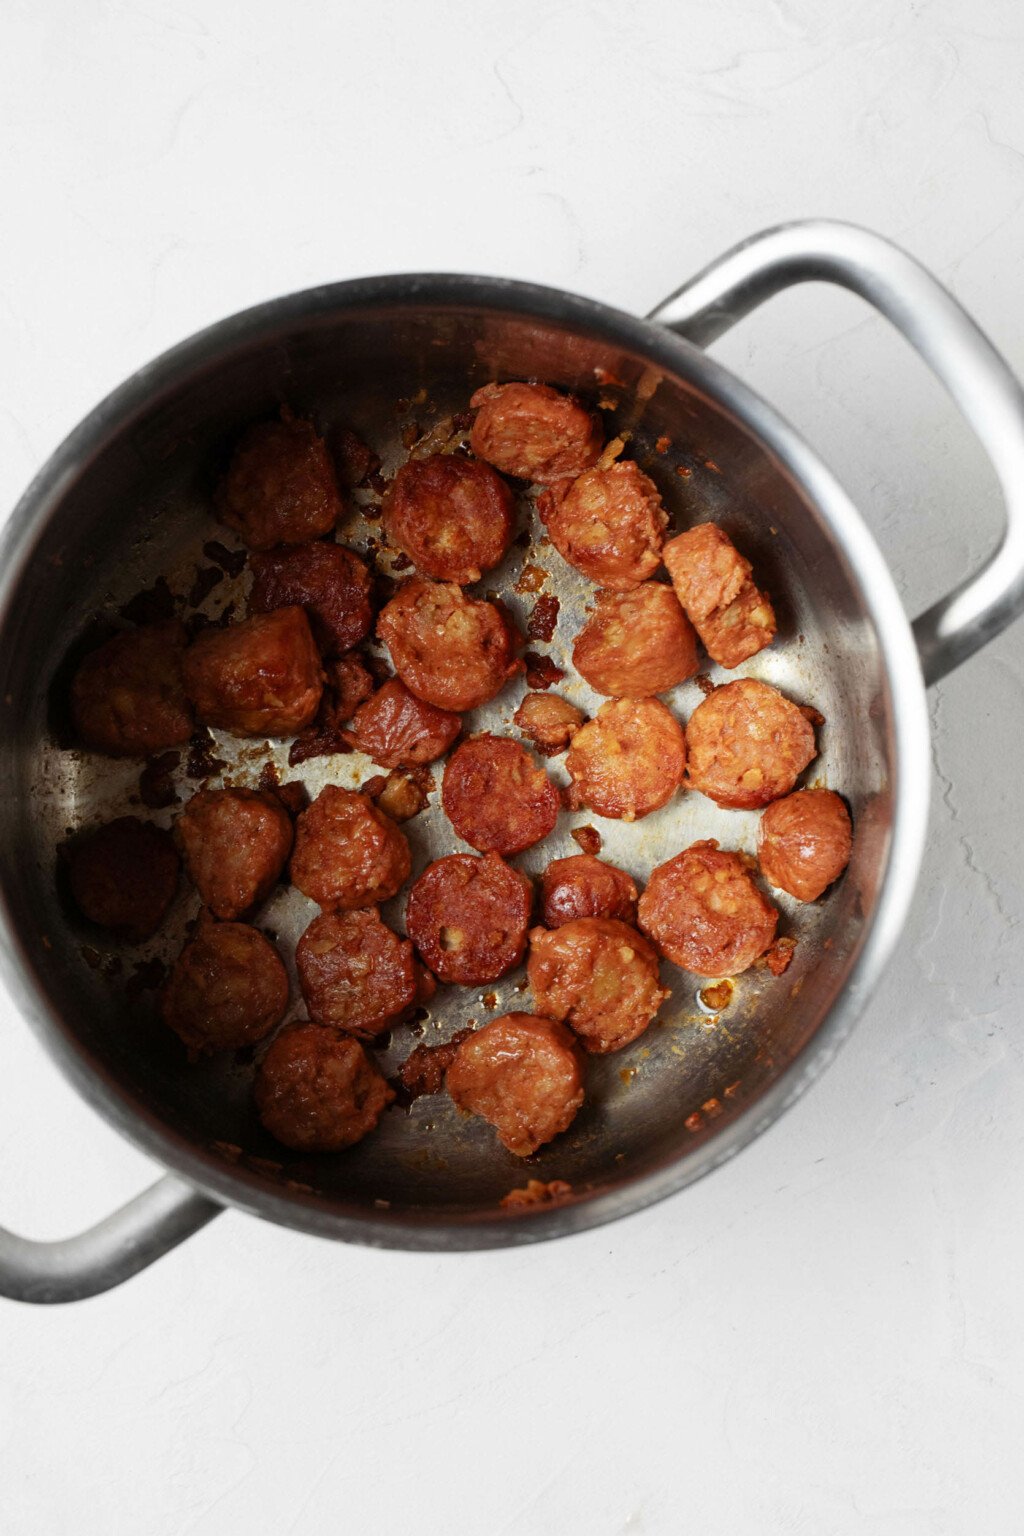 Round slices of sausage are being browned in a large soup pot.